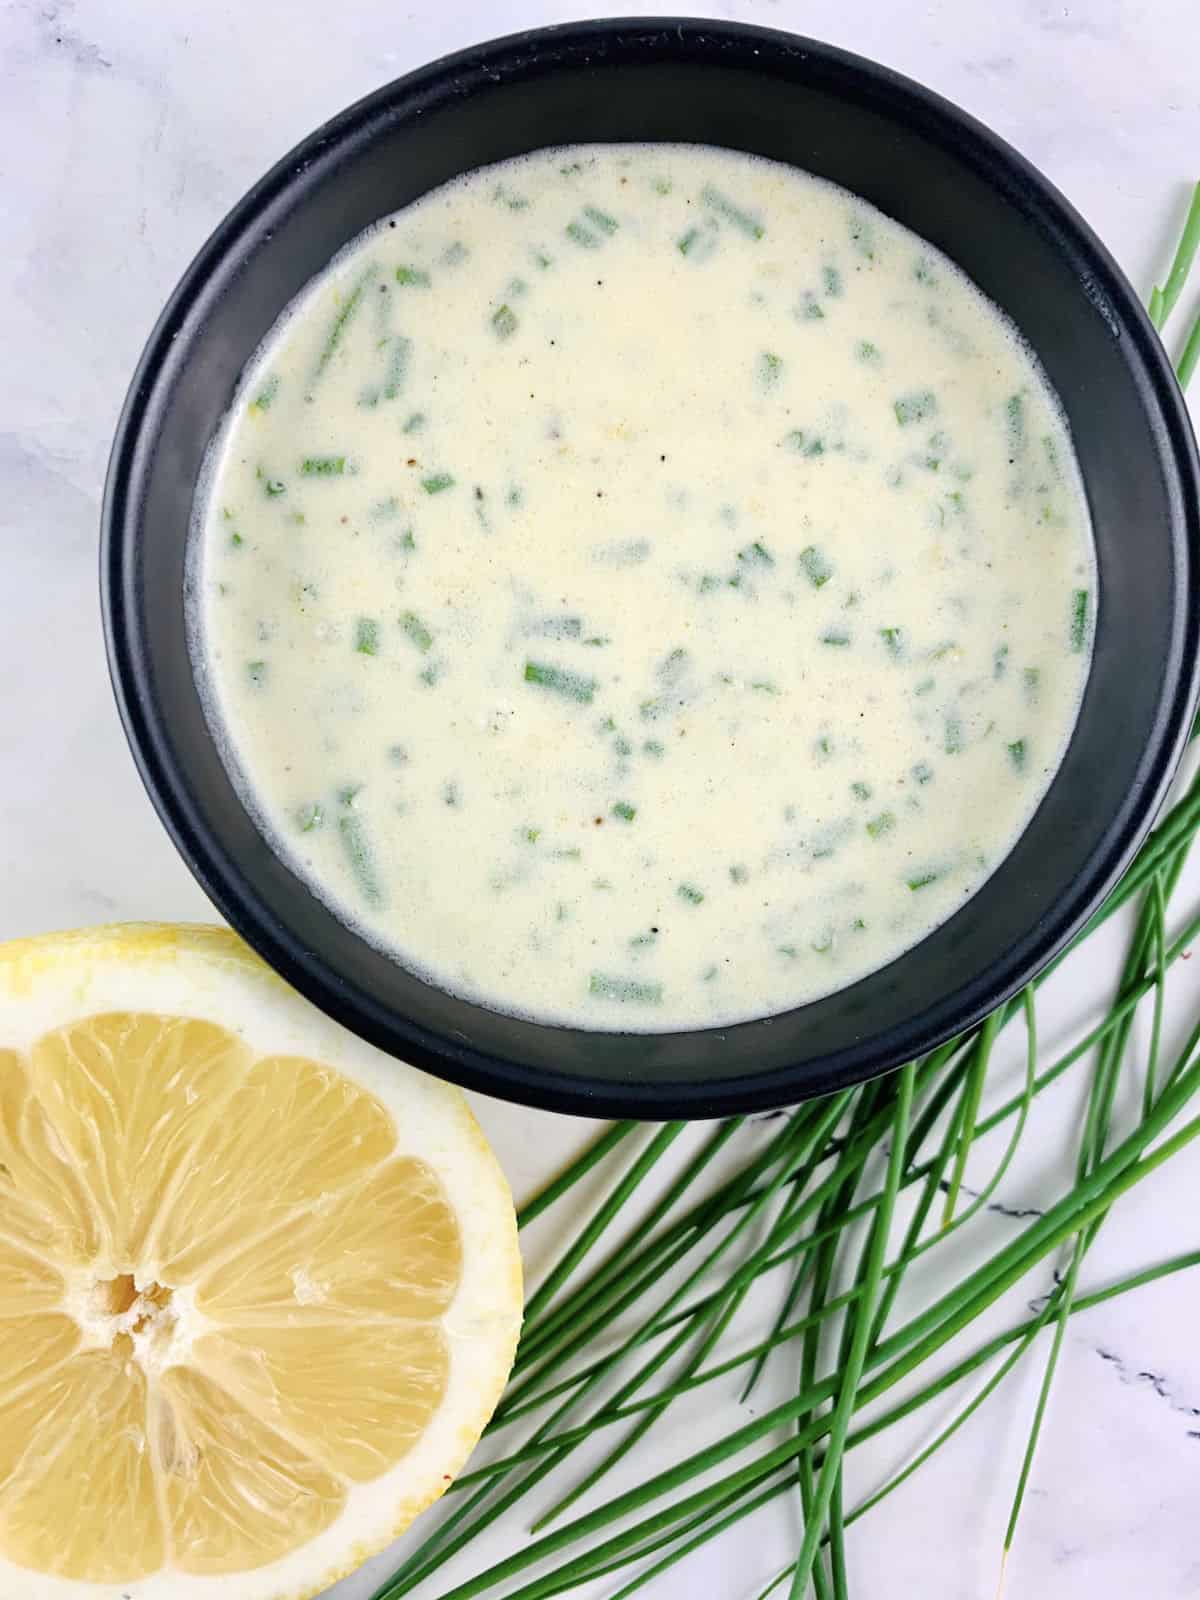 SOUR CREAM & CHIVE DRESSING IN A BLACK BOWL WITH CHIVES AND LEMON ON THE SIDE